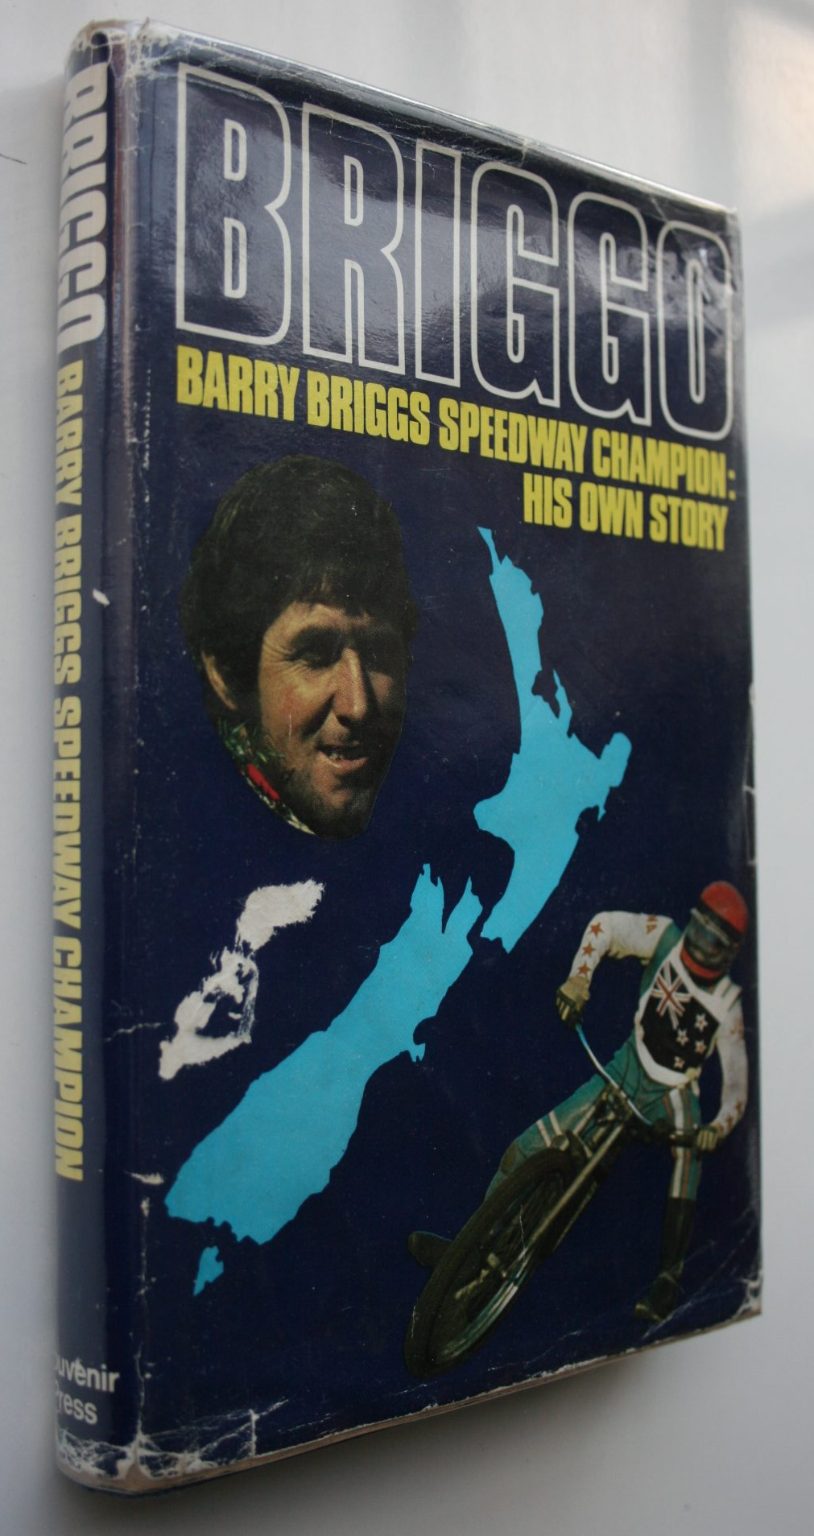 BRIGGO - Barry Briggs Speedway Champion: His Own Story by Barry Briggs.